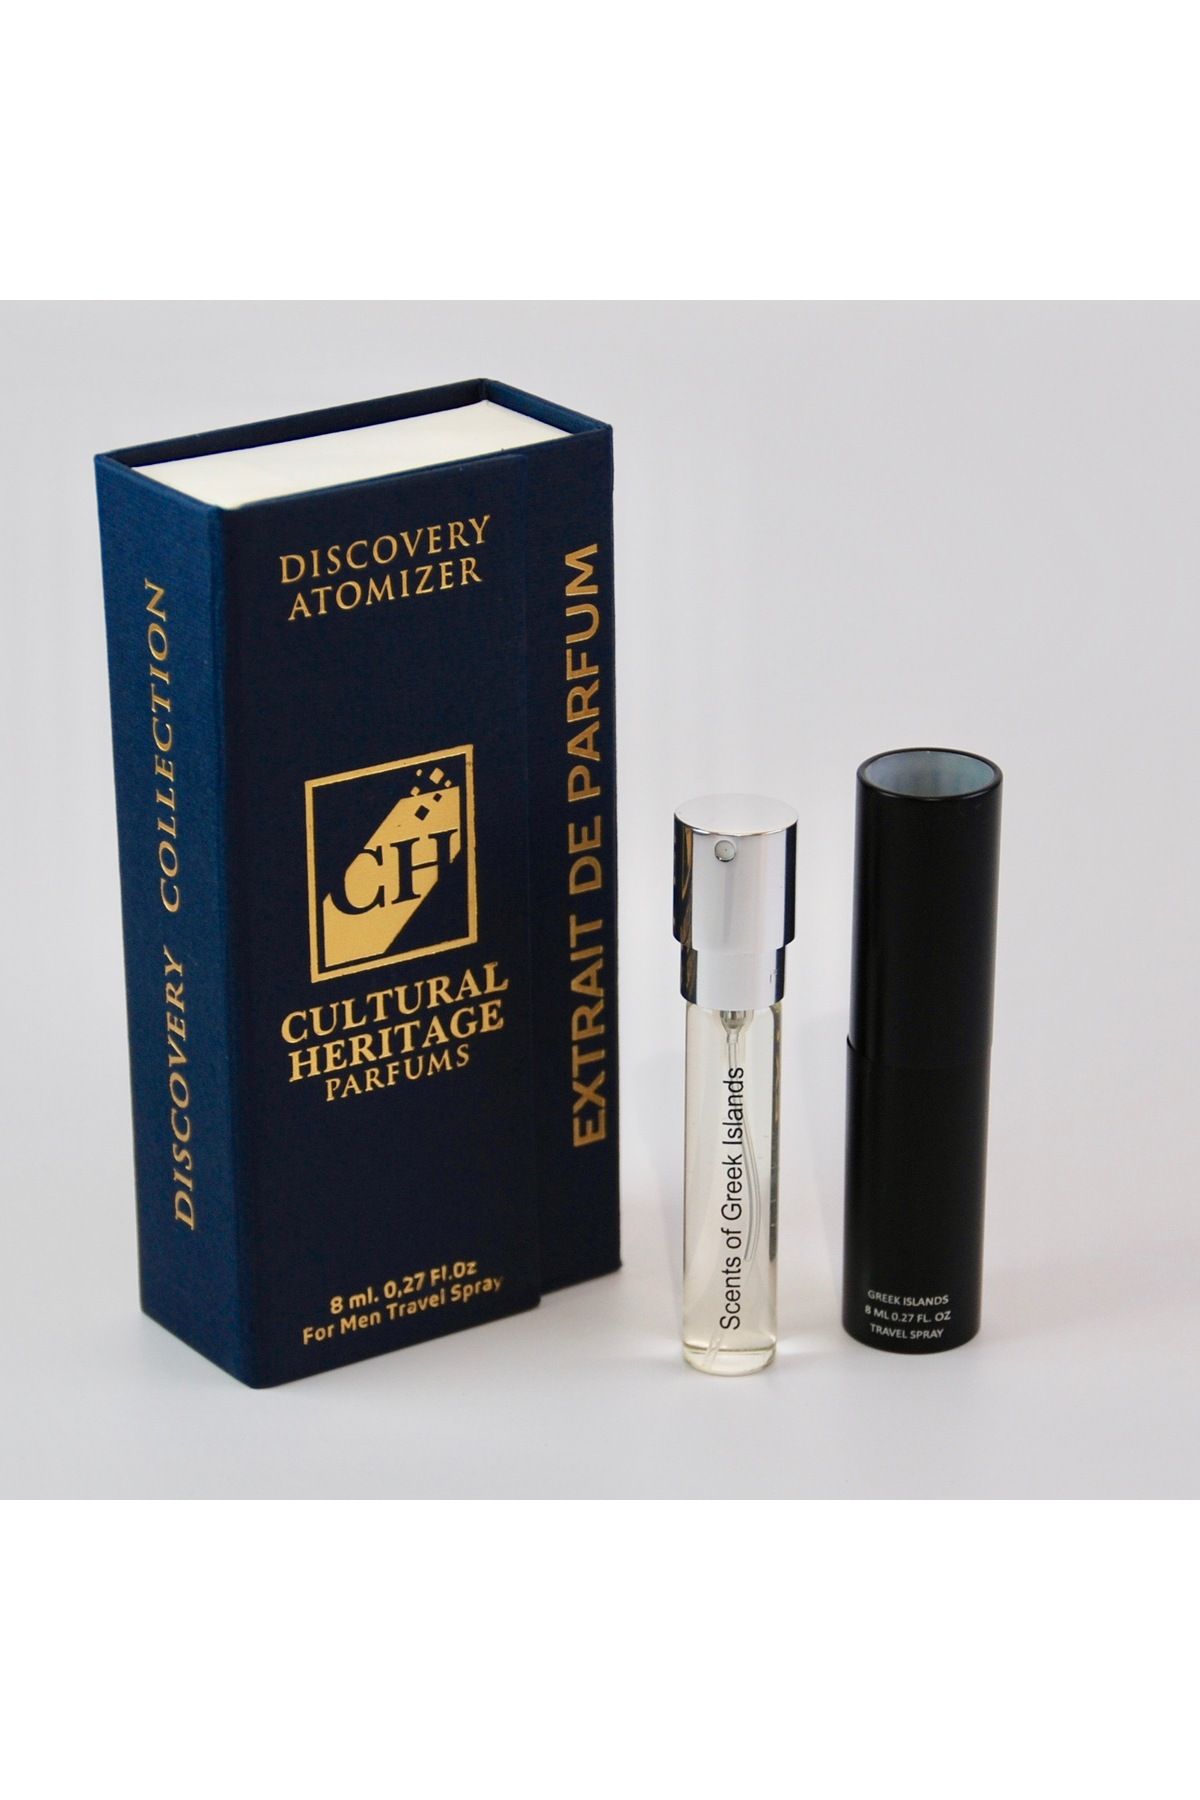 CH CULTURAL HERITAGE , Scents of Greek İslands Discovery Atomizer Travel Spray, for Men,